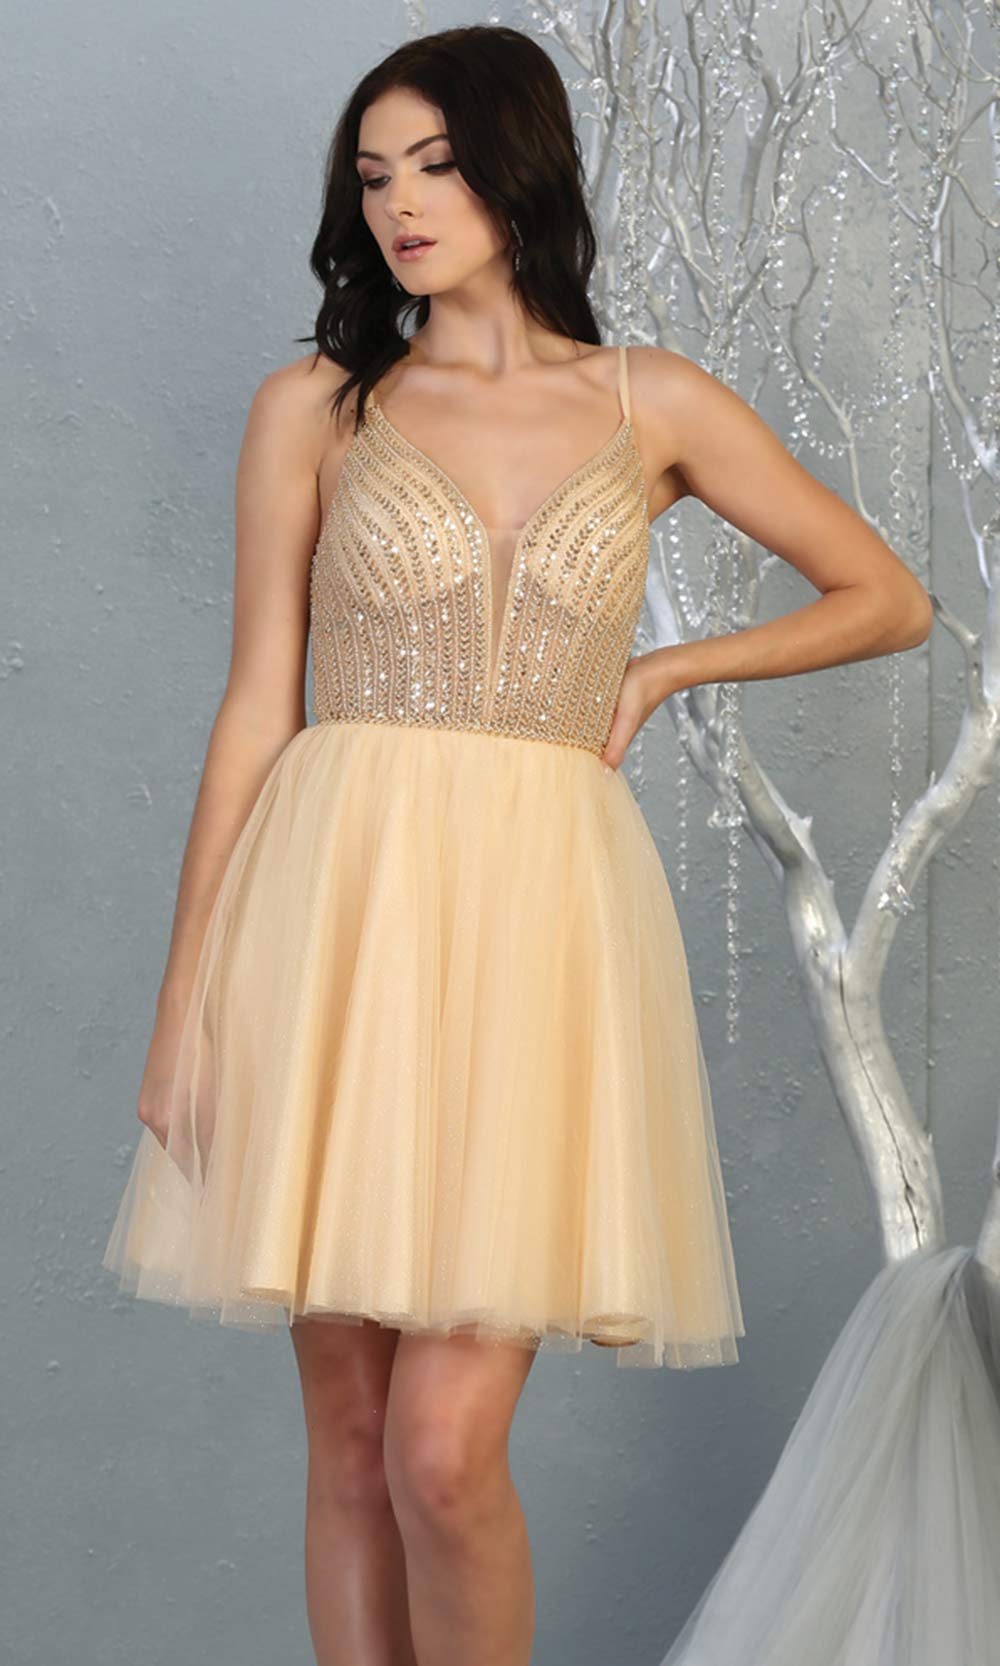 Mayqueen MQ1800 short champagne sequin flowy vneck grade 8 graduation dress w/ straps & puffy skirt. Light gold party dress is perfect for prom, graduation, grade 8 grad, confirmation dress, bat mitzvah dress, damas. Plus sizes avail for grad dress.jpggrade 8 grad dresses, graduation dresses